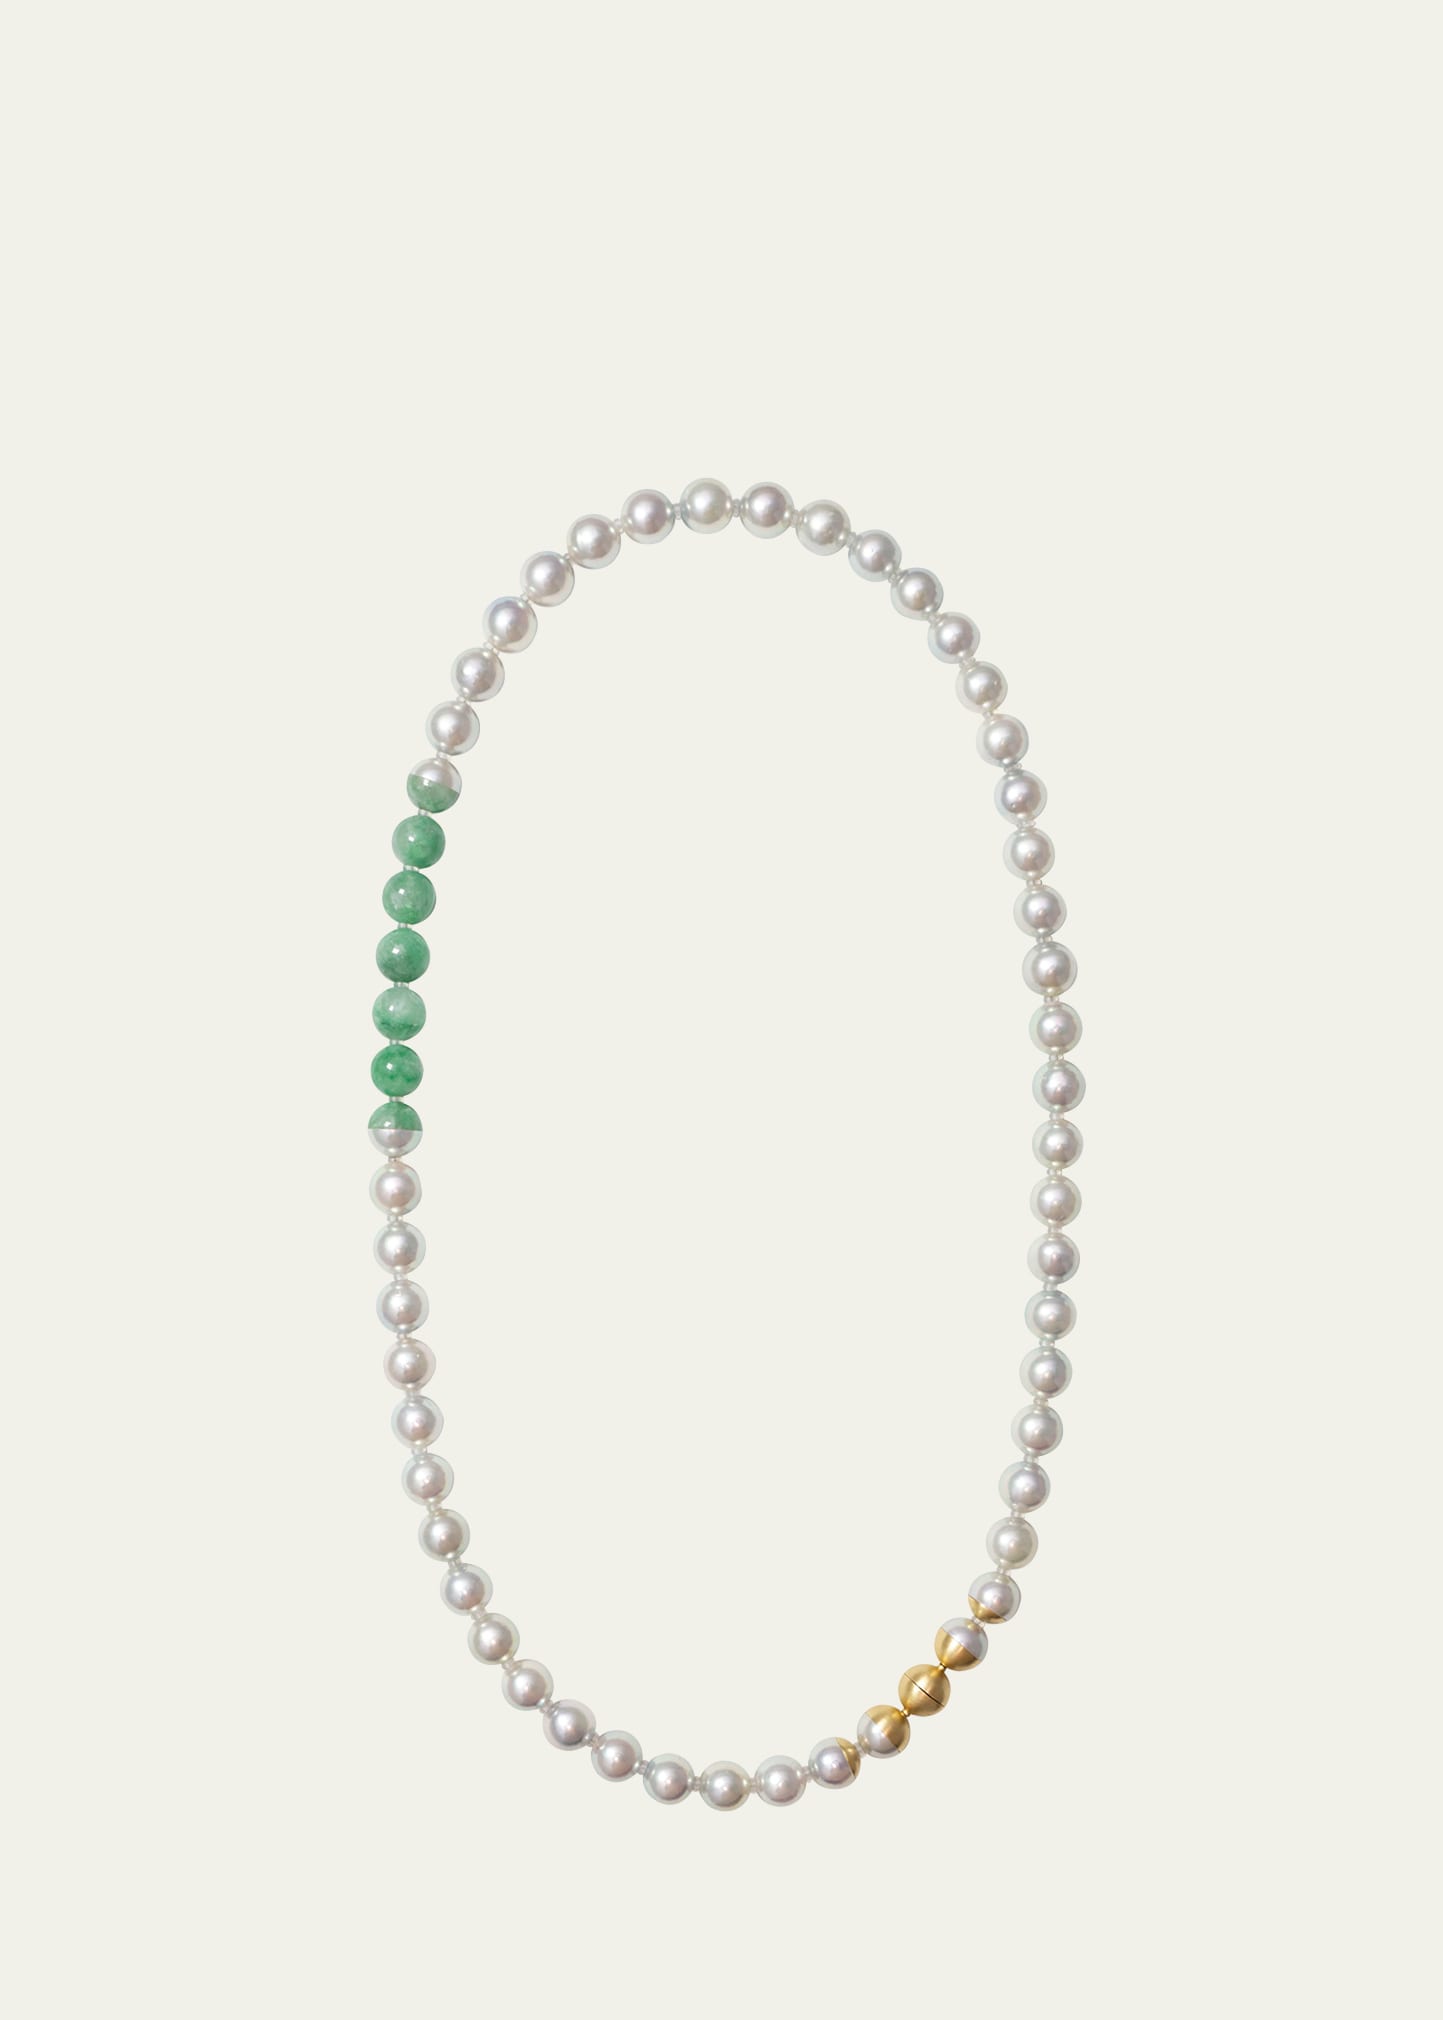 Yutai 18k Yellow Gold Sectional Pearl Necklace With Jade And Cultured Akoya Pearls In Metallic